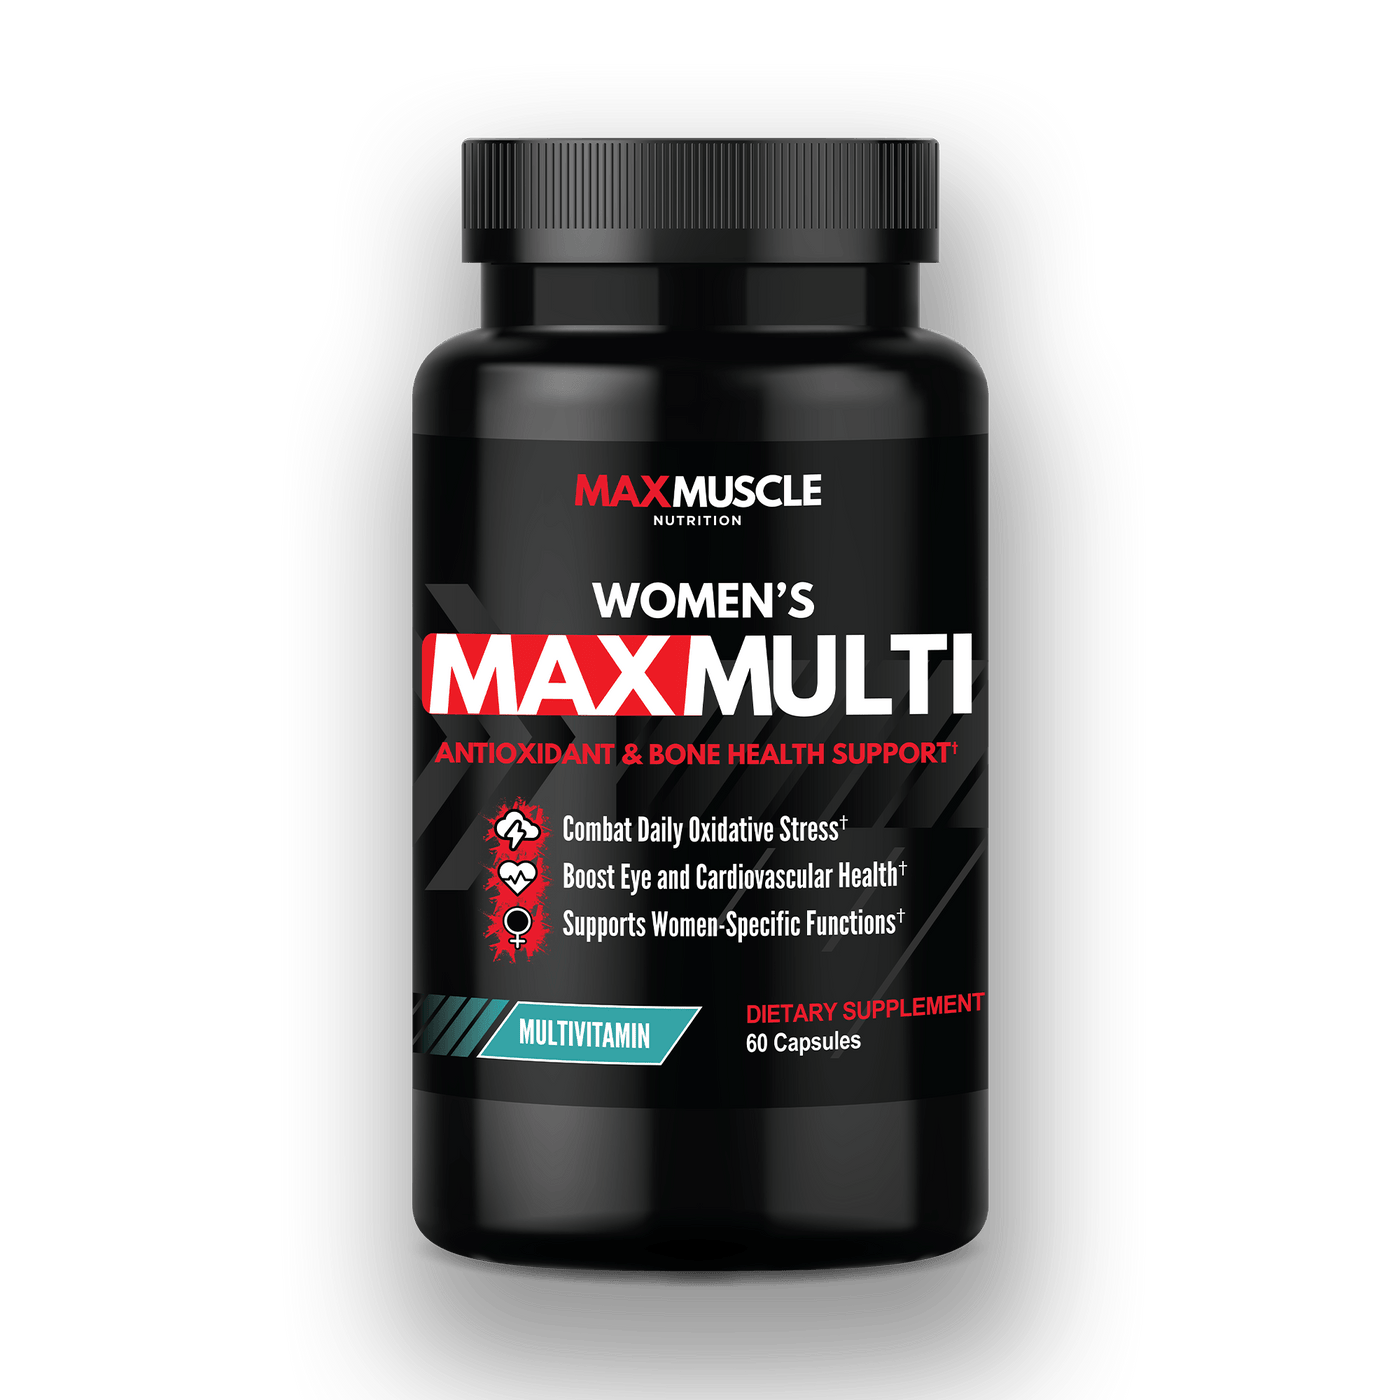 WOMEN'S MAX MULTI - Max Muscle Nutrition